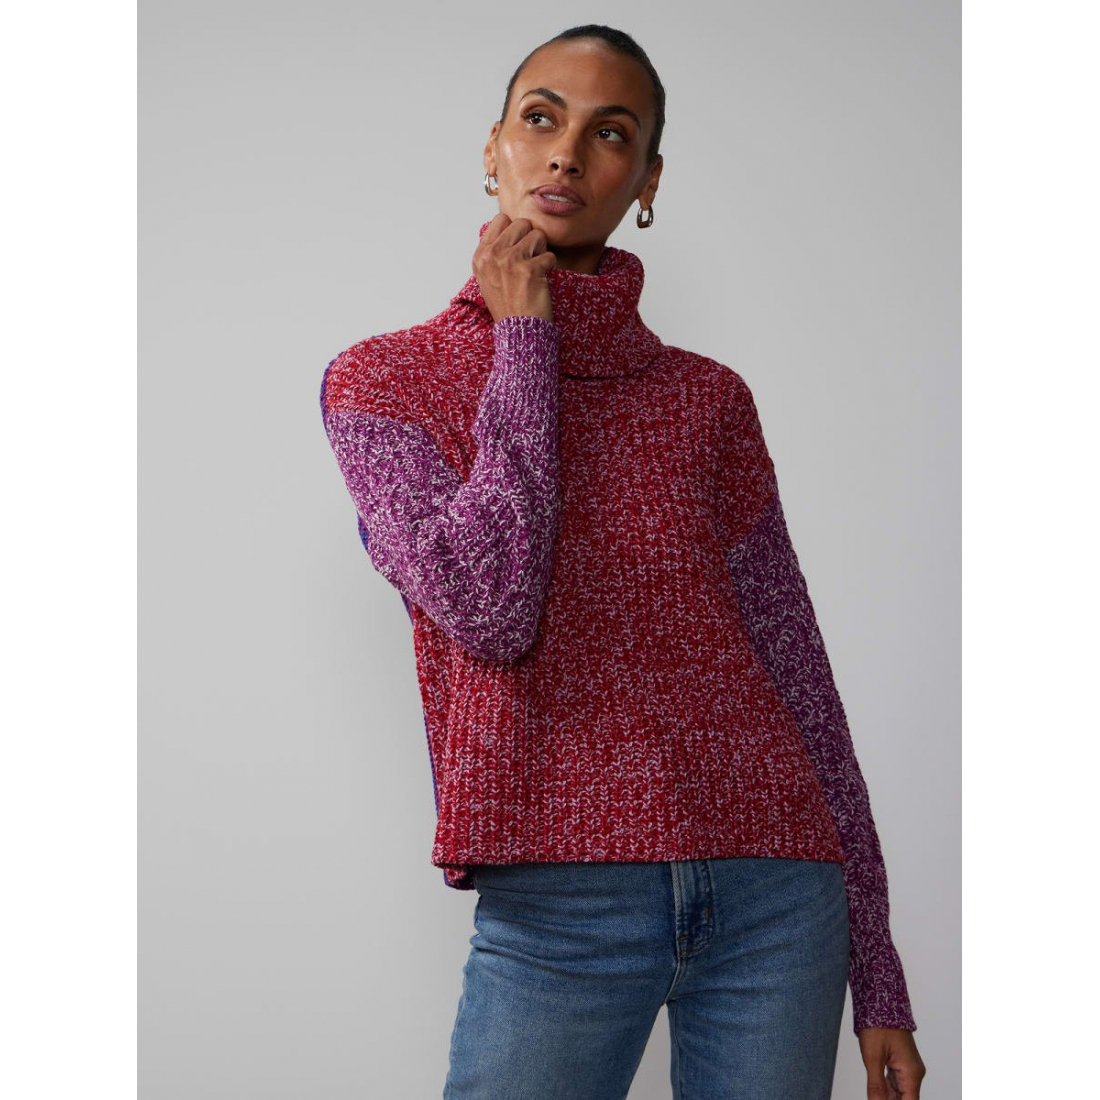 Women's 'Marled Colorblock' Sweater